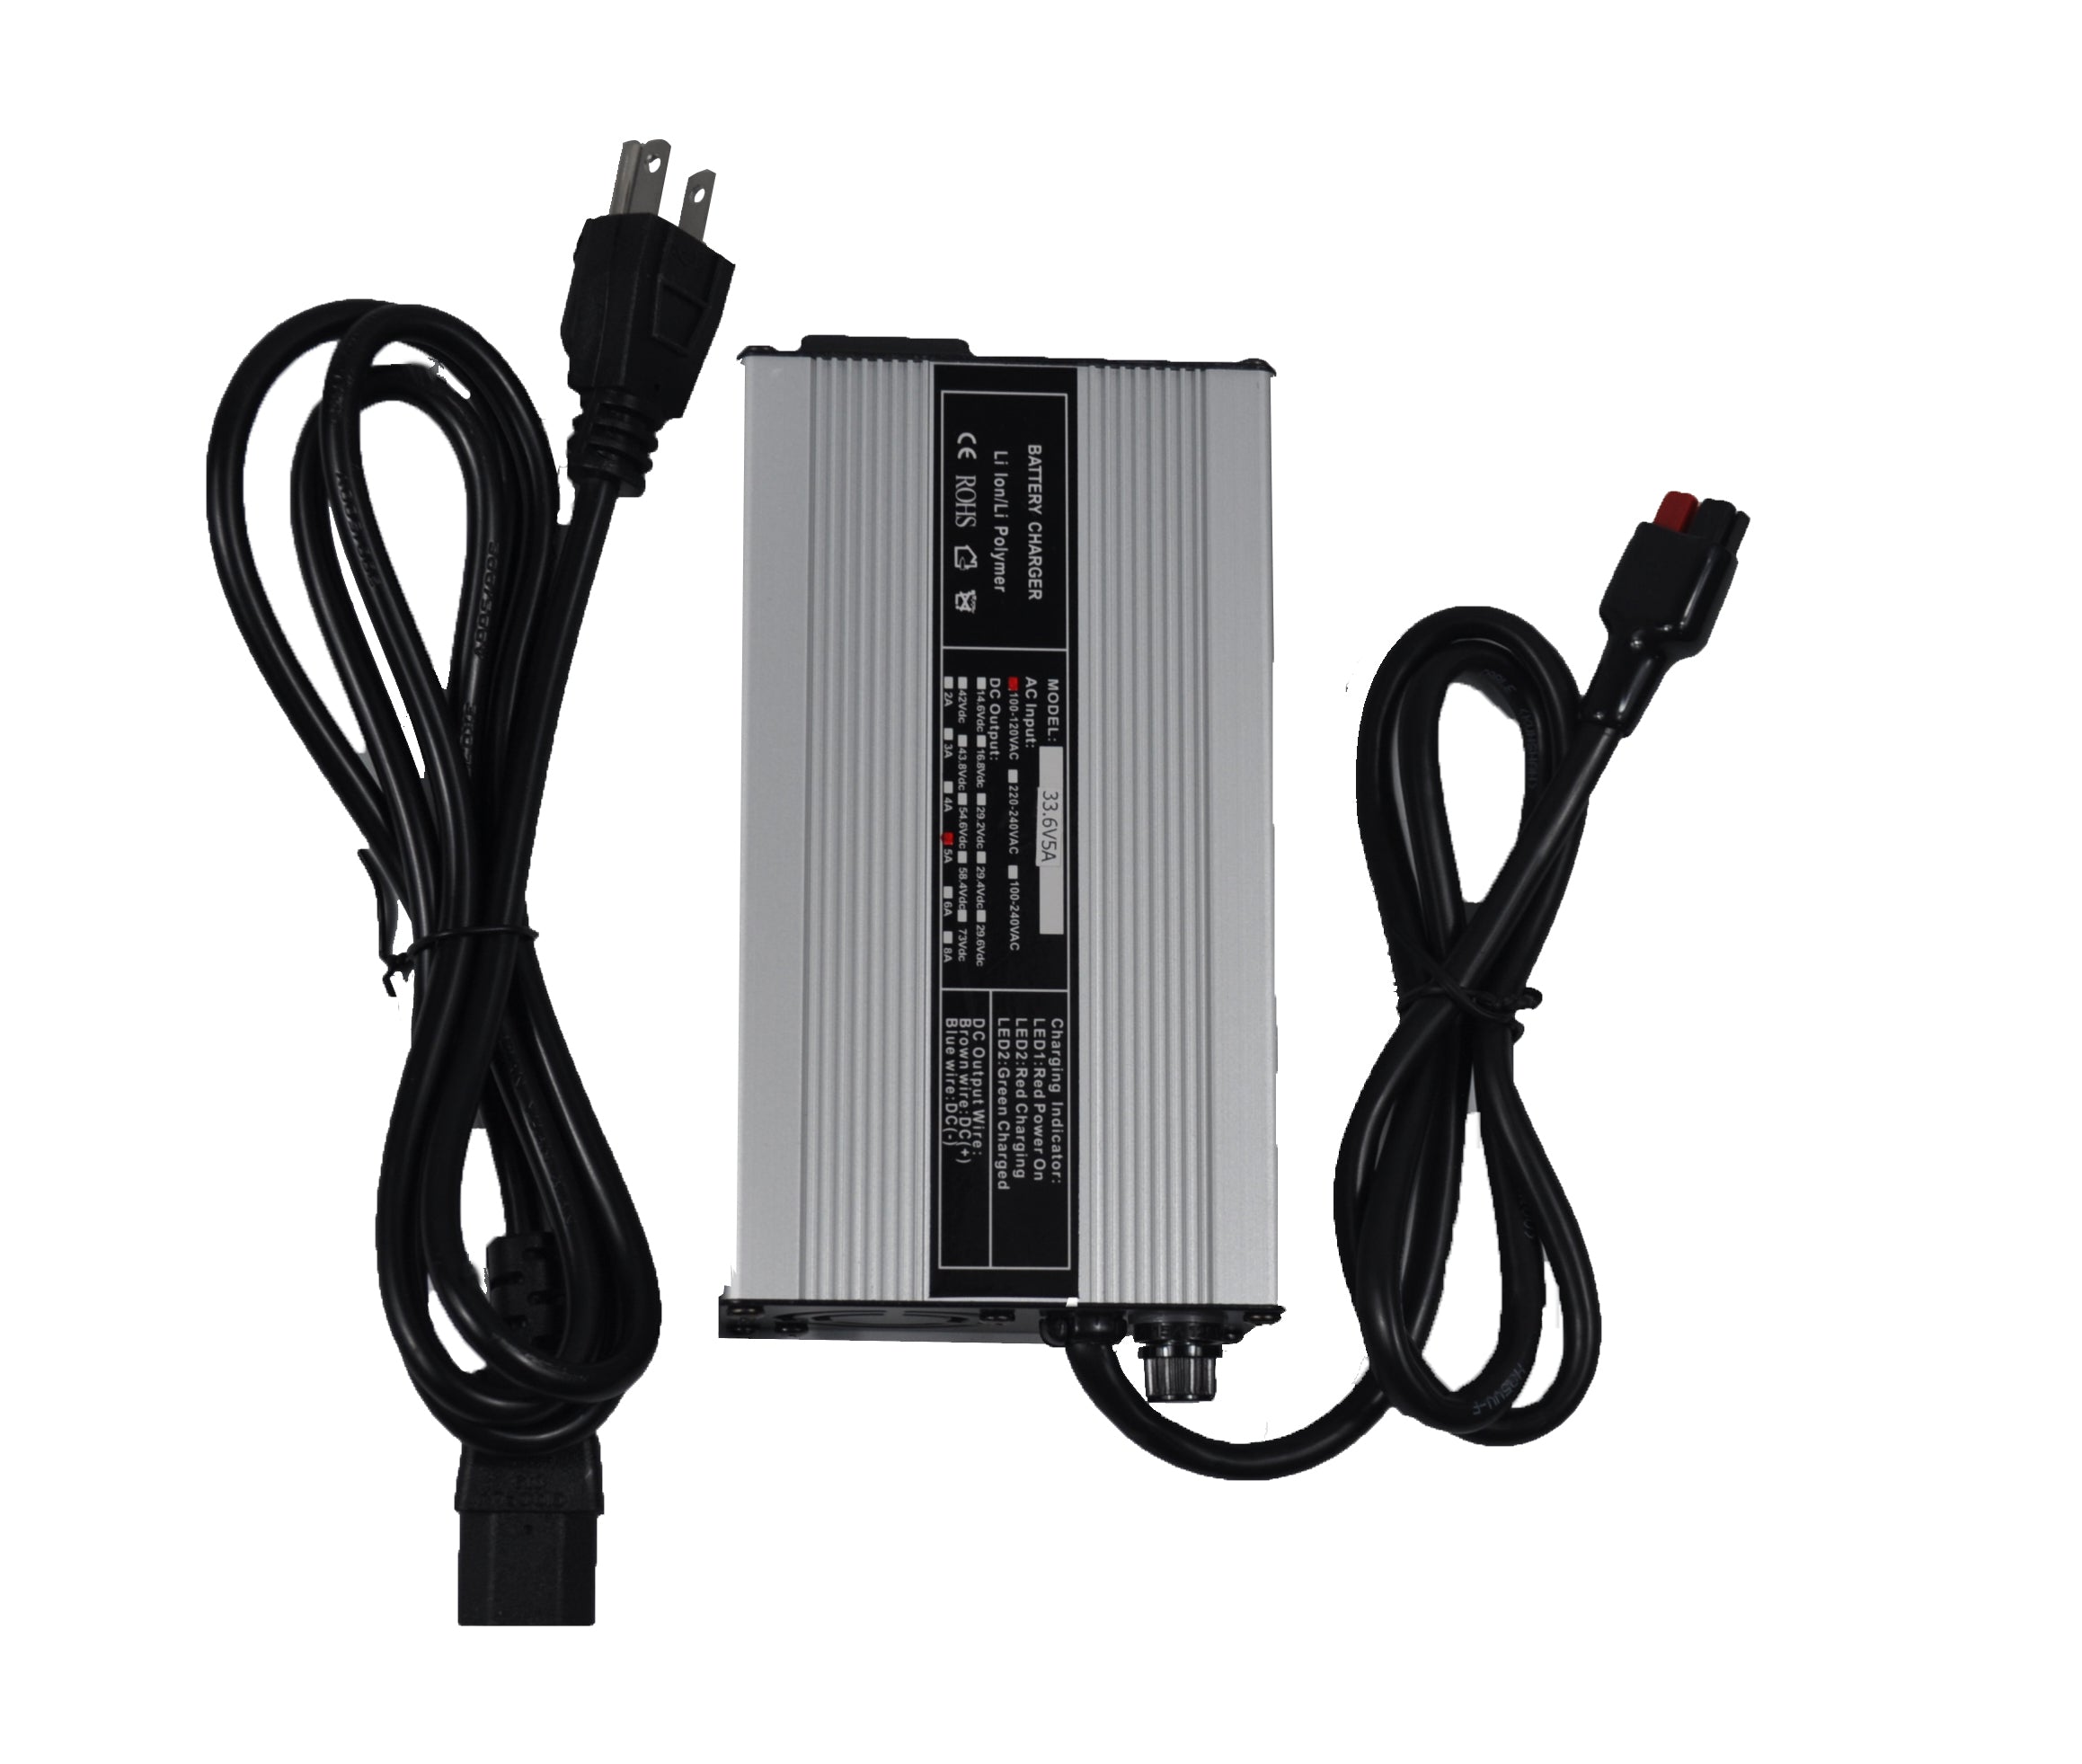 72V 5A Li-ion Battery Charger - Aegis Battery Lithium ion